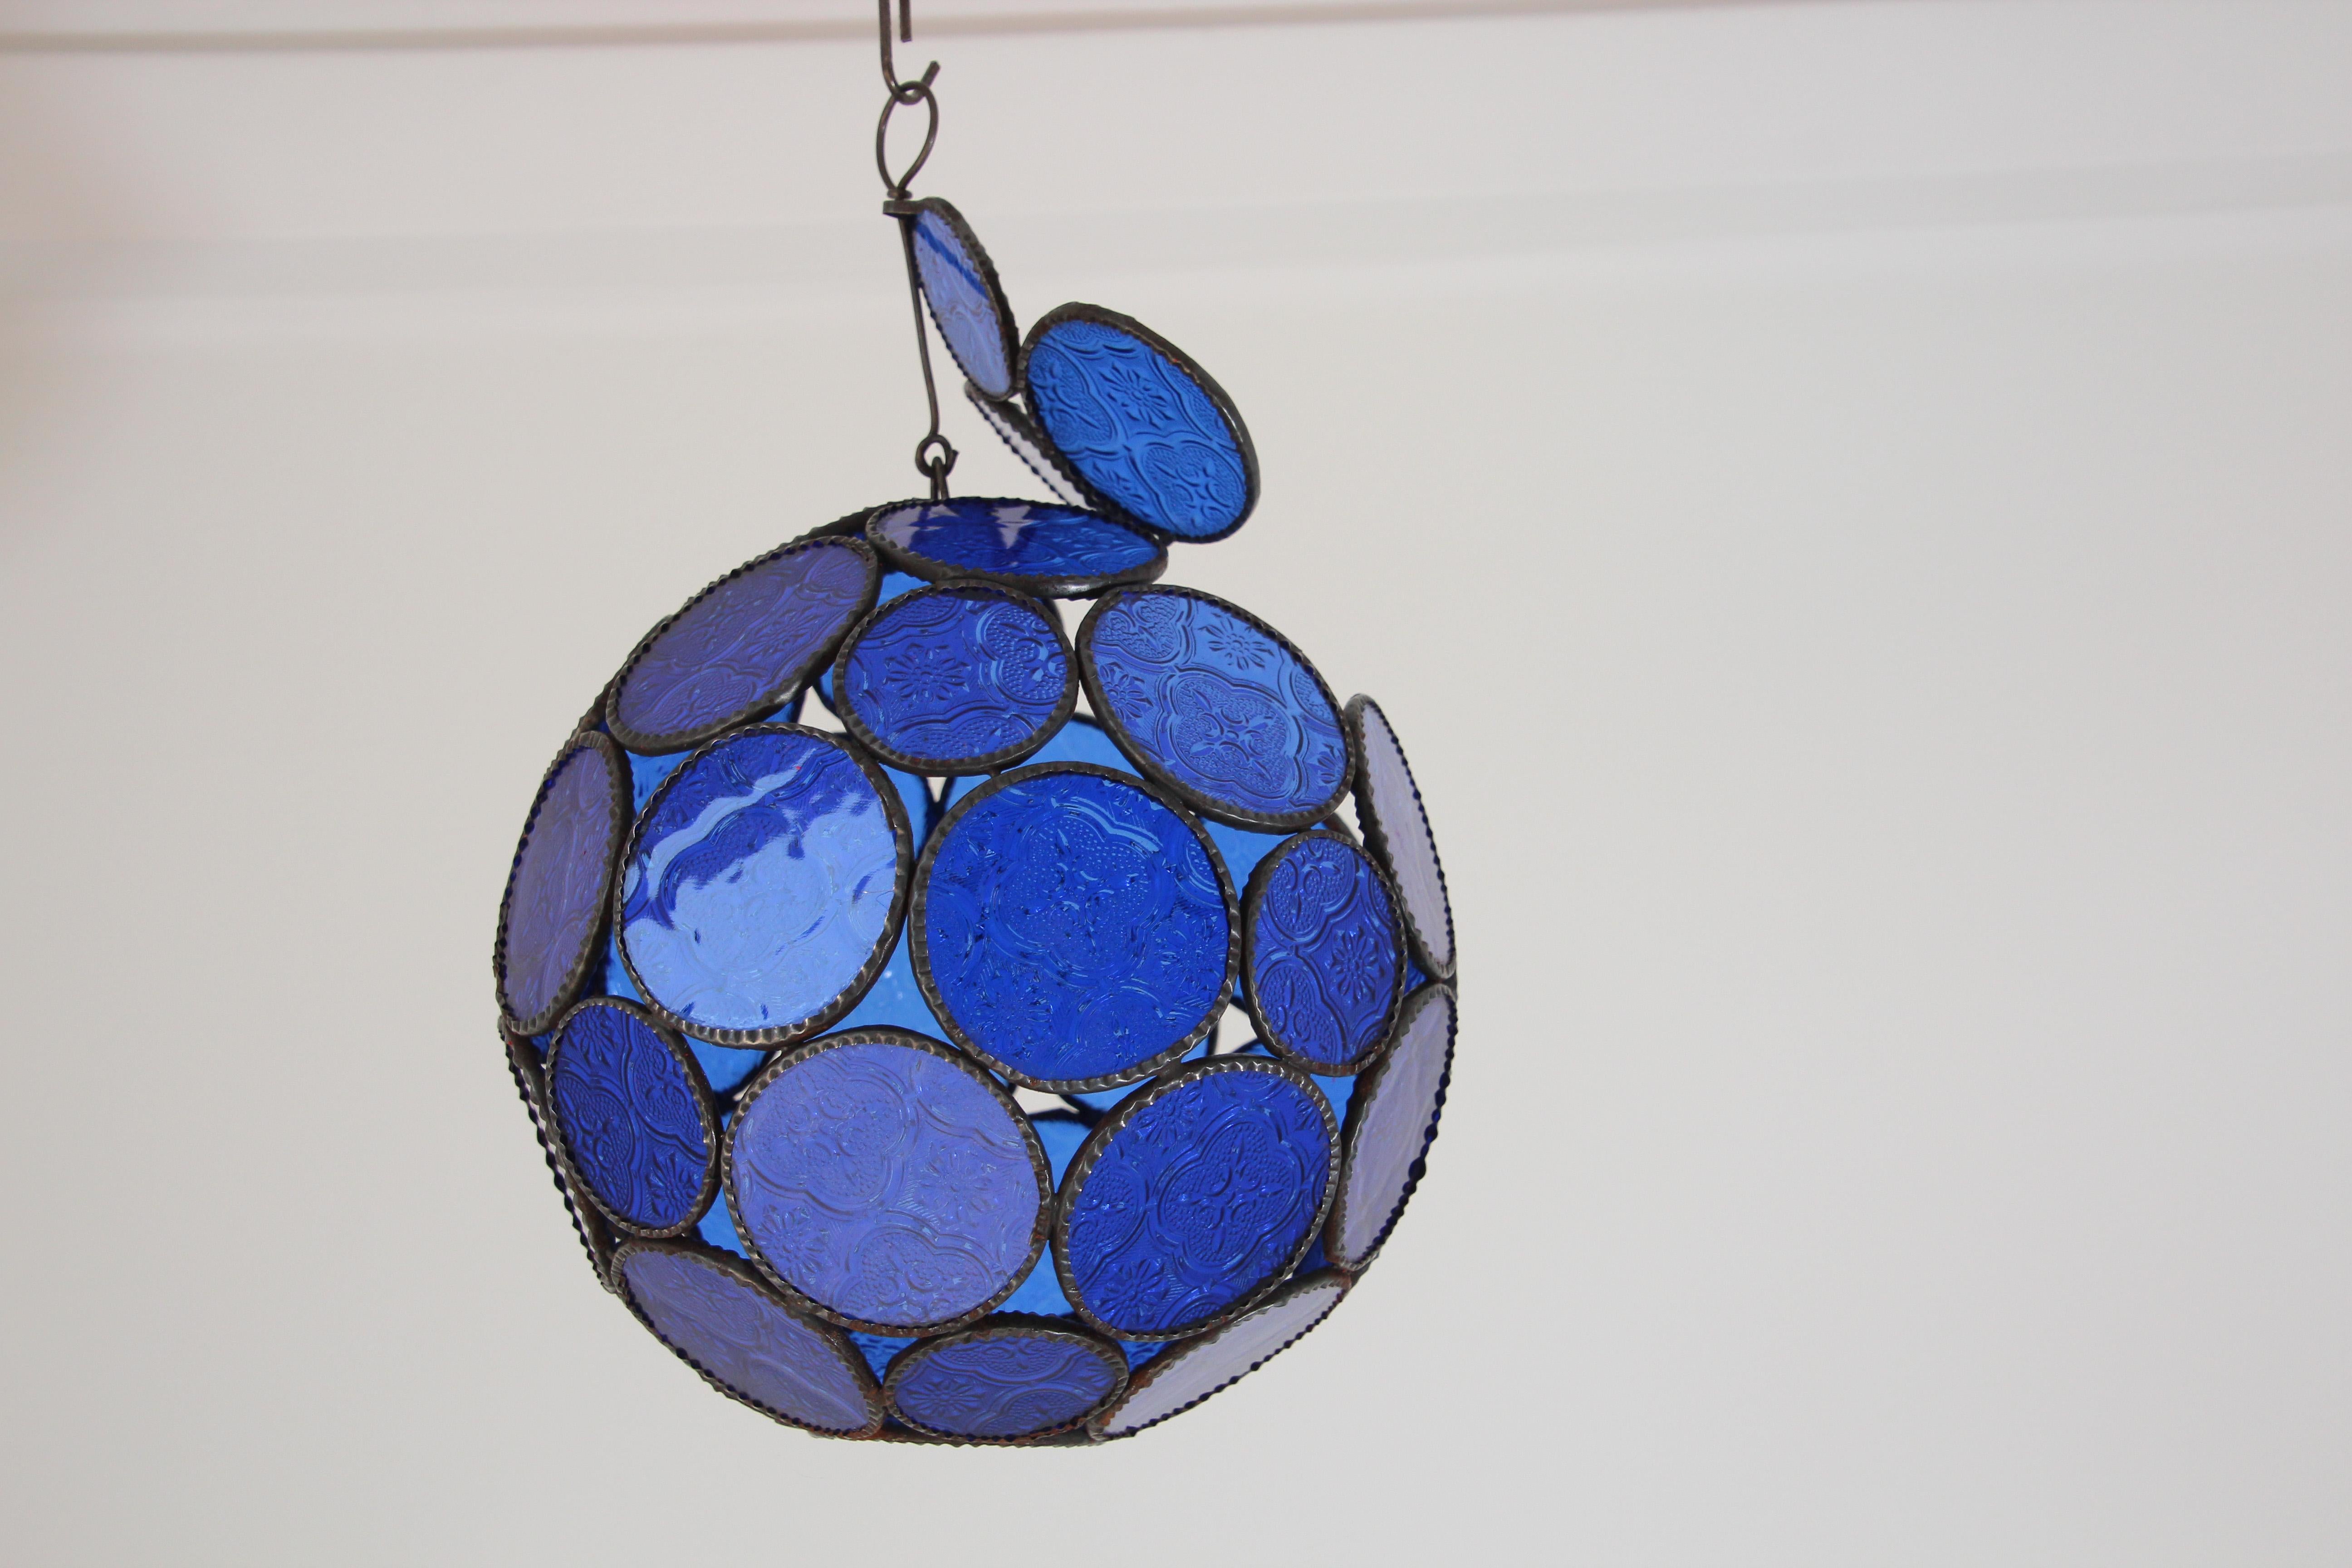 Handcrafted Moroccan Moorish Glass Orb Lantern with Blue Glass For Sale 10